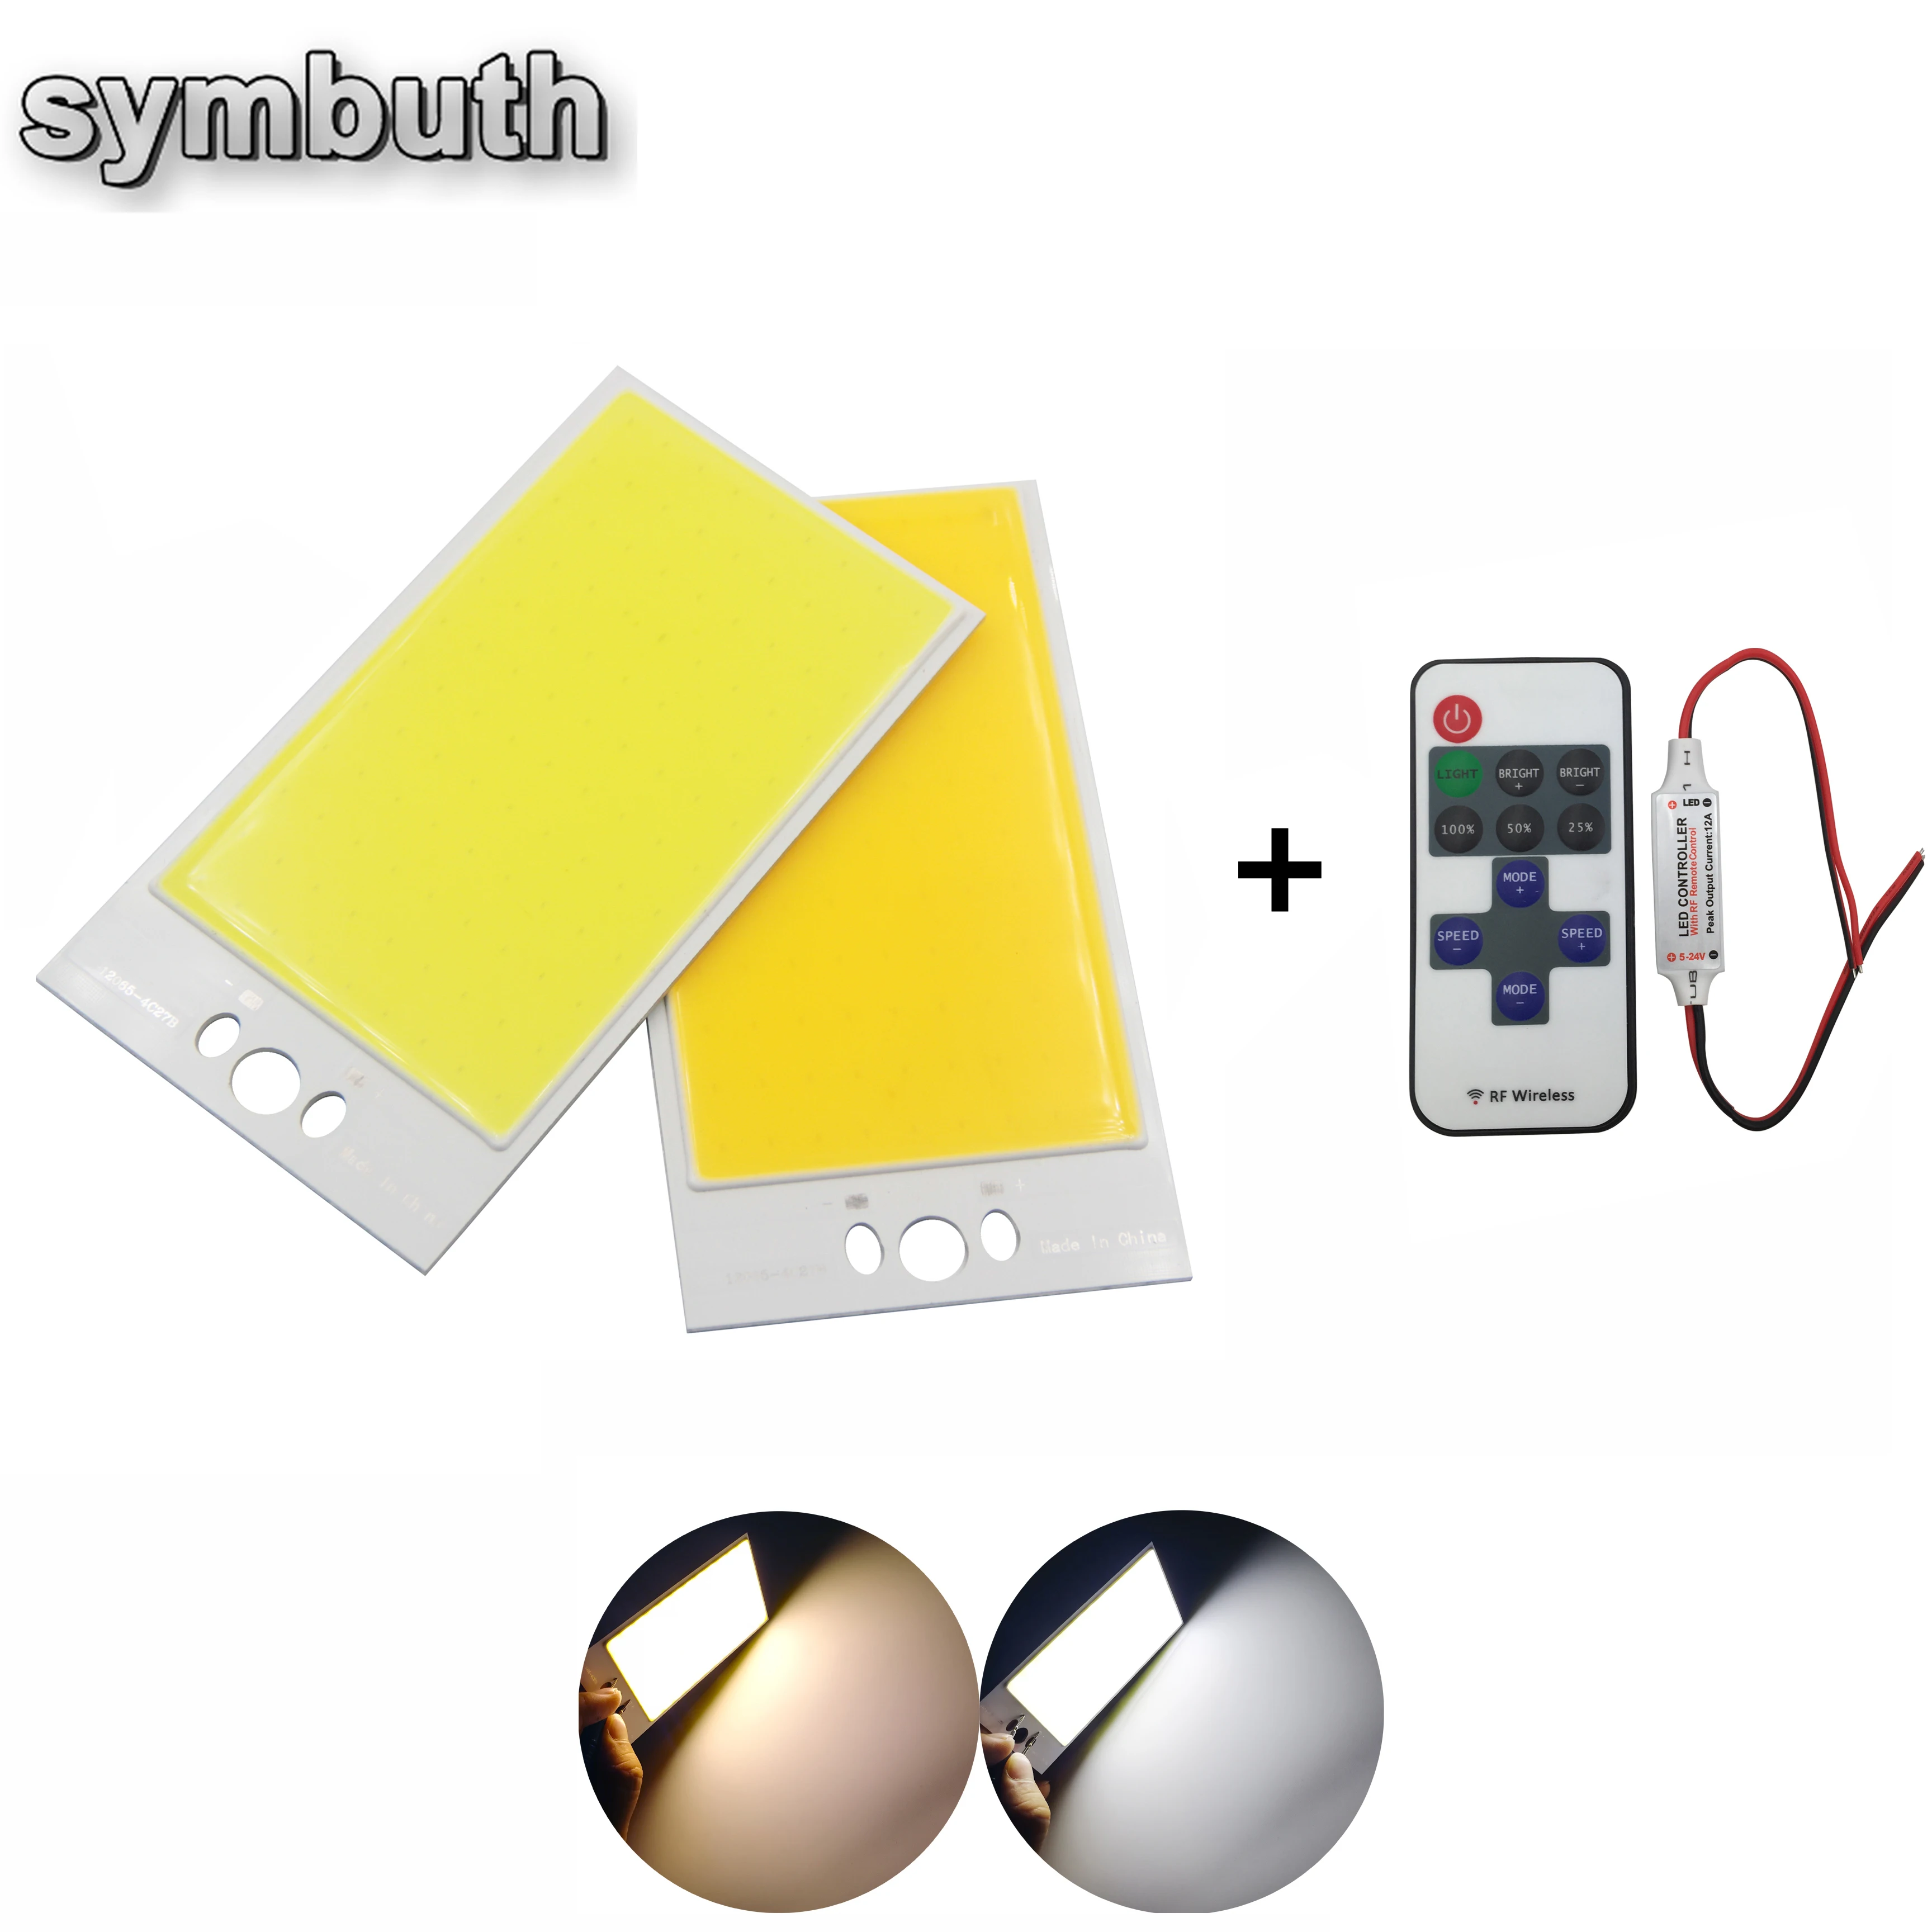 Dimmable 120*65mm COB Led Panel Light Source 30W Lamp Bulb with RF Controller Dimmer 12V DC for DIY Auto Lights Work Lamp